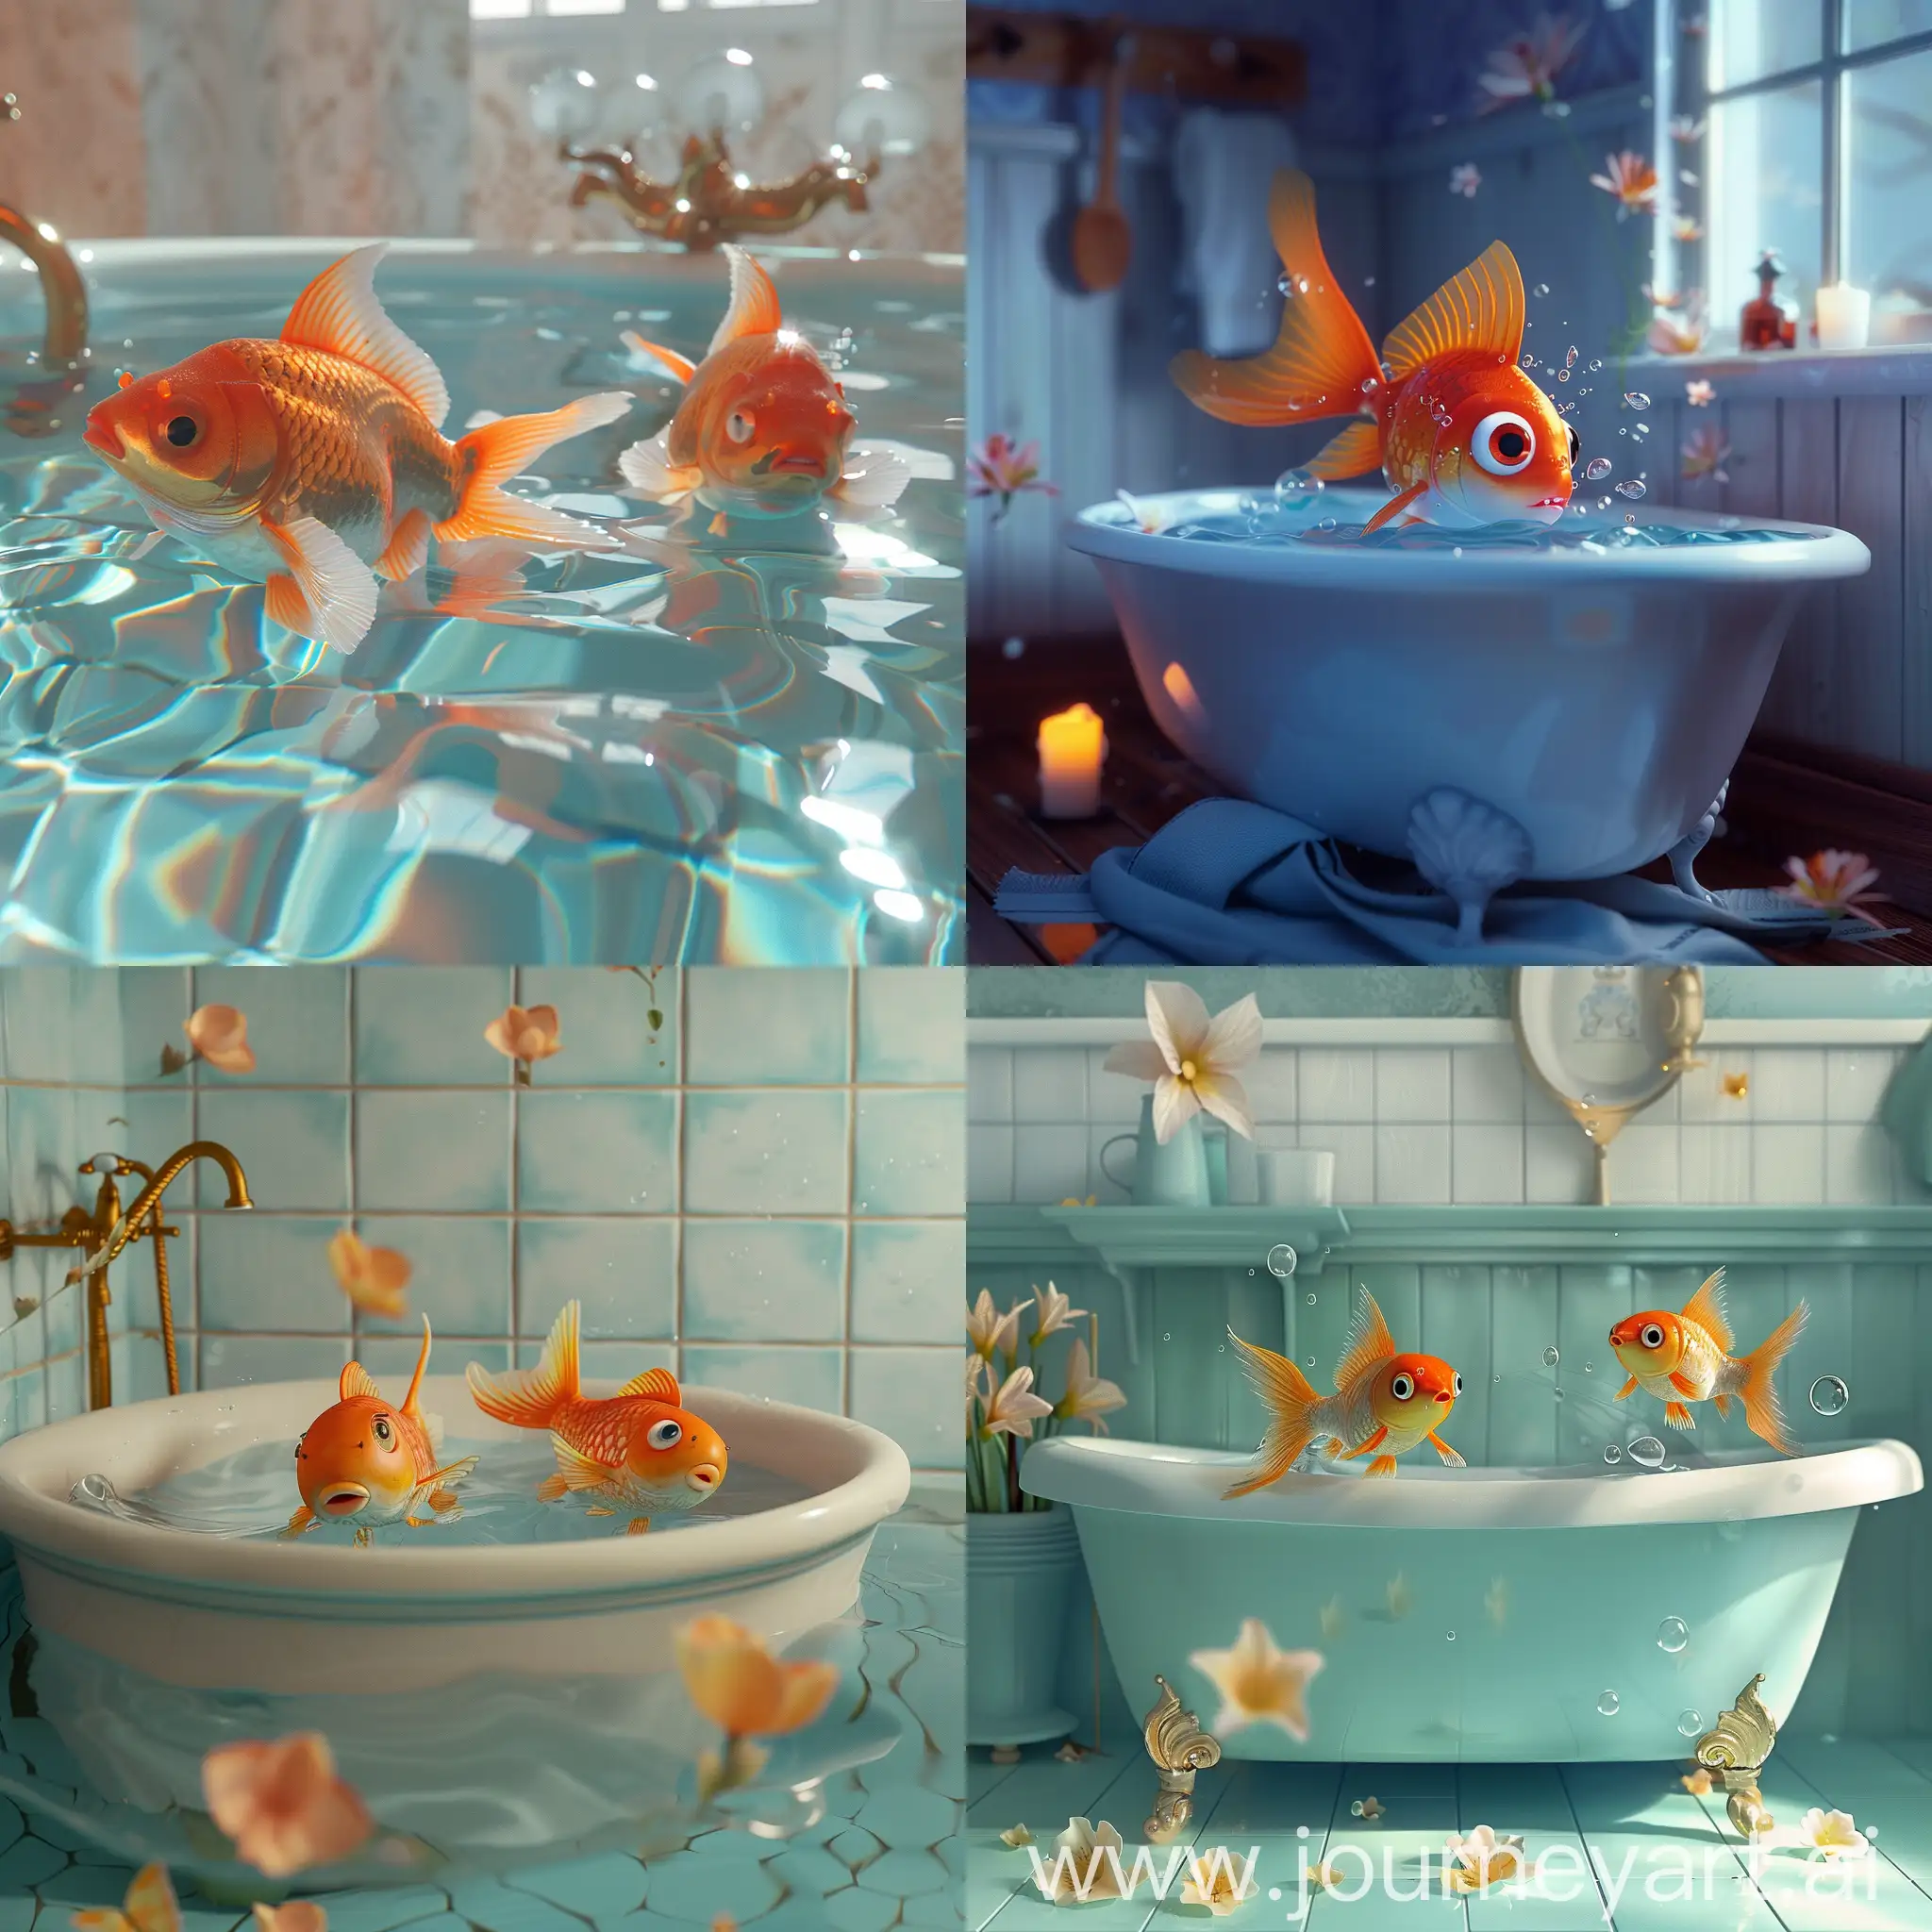 Colorful-Fish-Swimming-in-a-Vibrant-Bathtub-3D-Animation